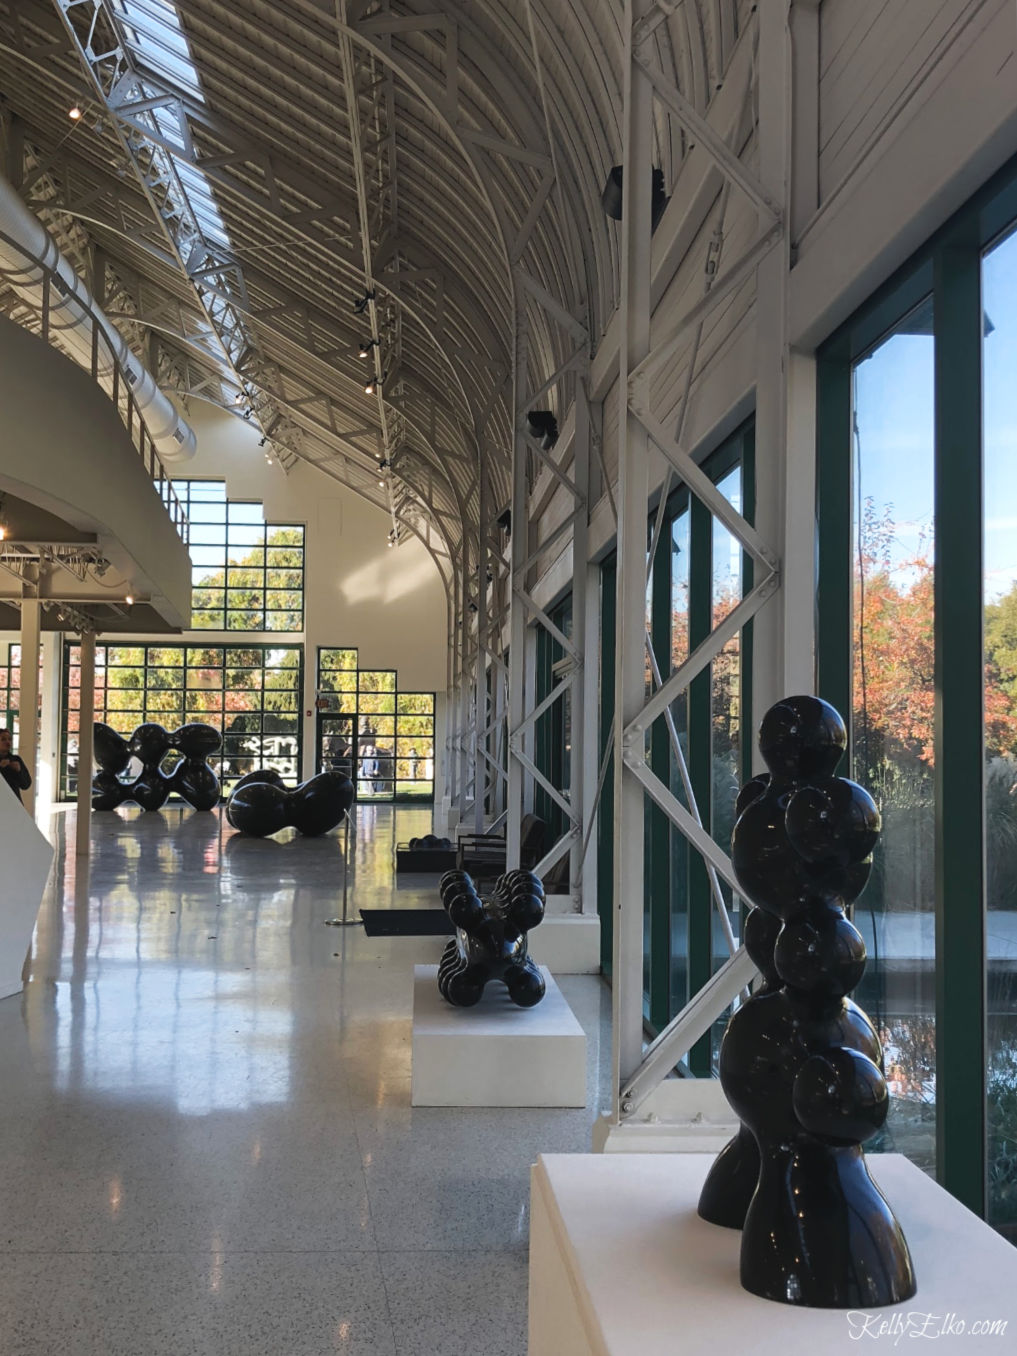 Grounds for Sculpture is a must visit for art lovers and the inside spaces are equally beautiful kellyelko.com #farmhouse #barn #sculpture #daytrip #nj #njblogger #visitnj #architecture 